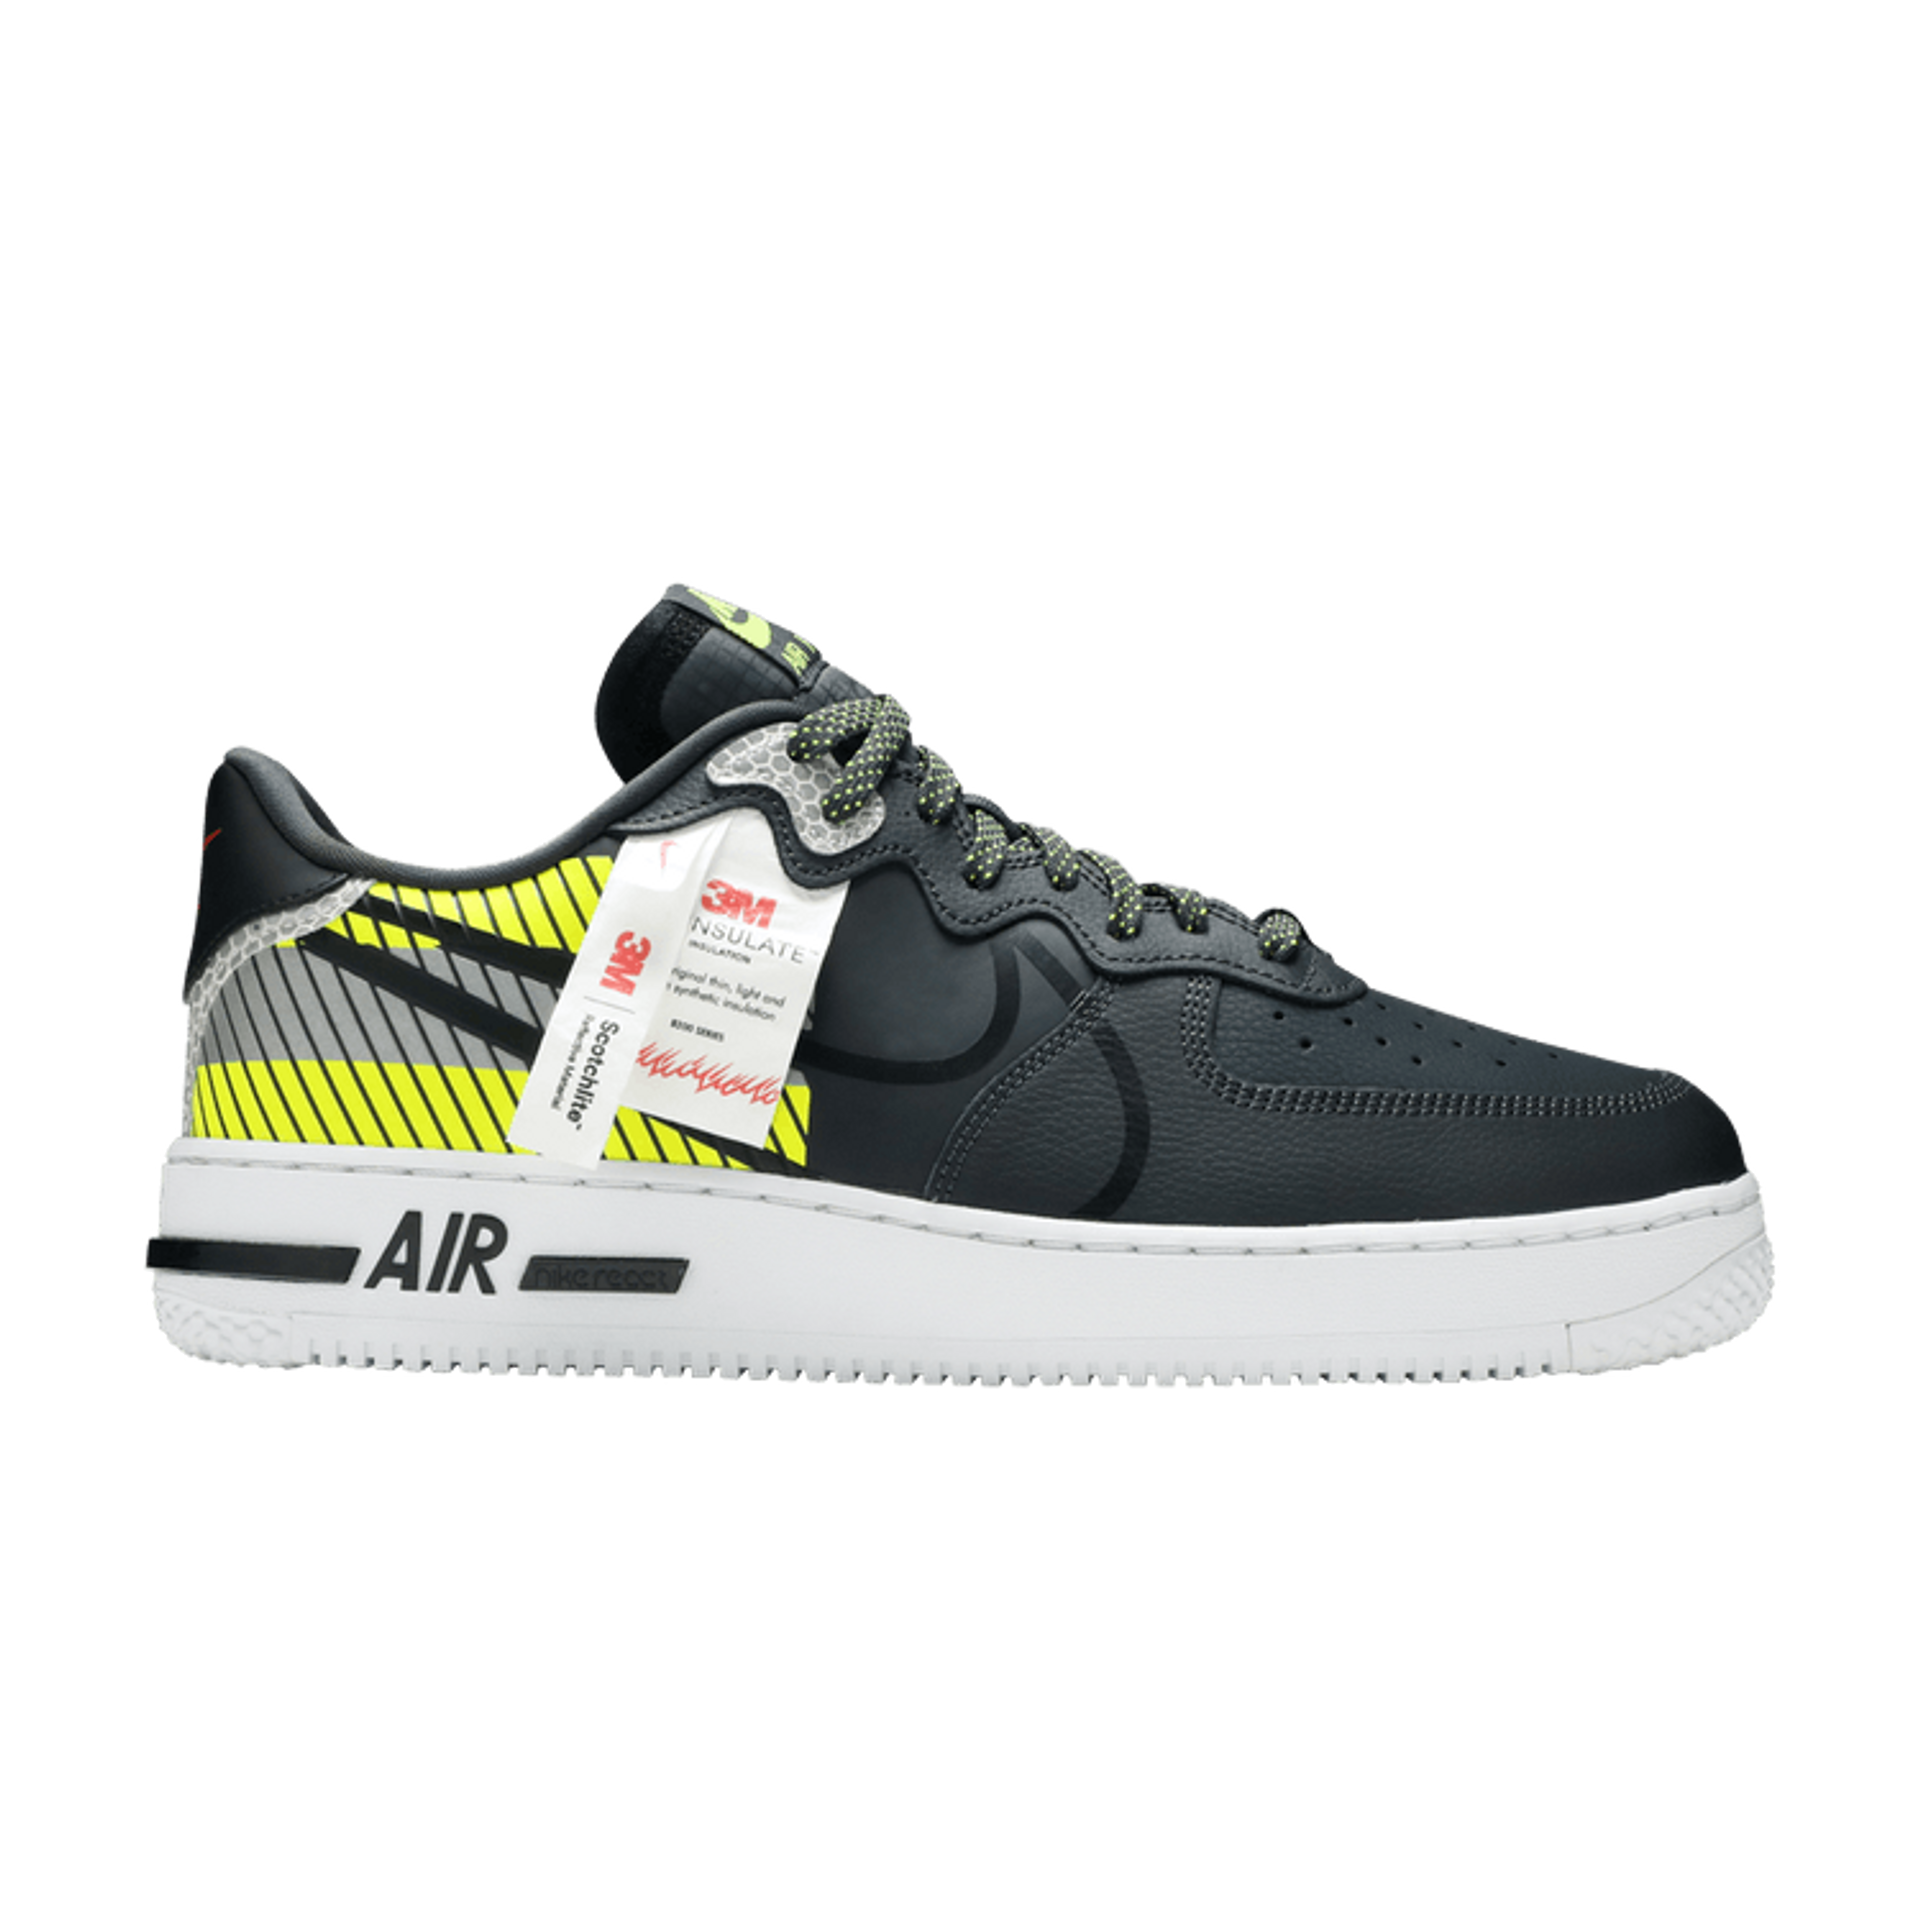 3M x Air Force 1 React LX 'Anthracite Volt'